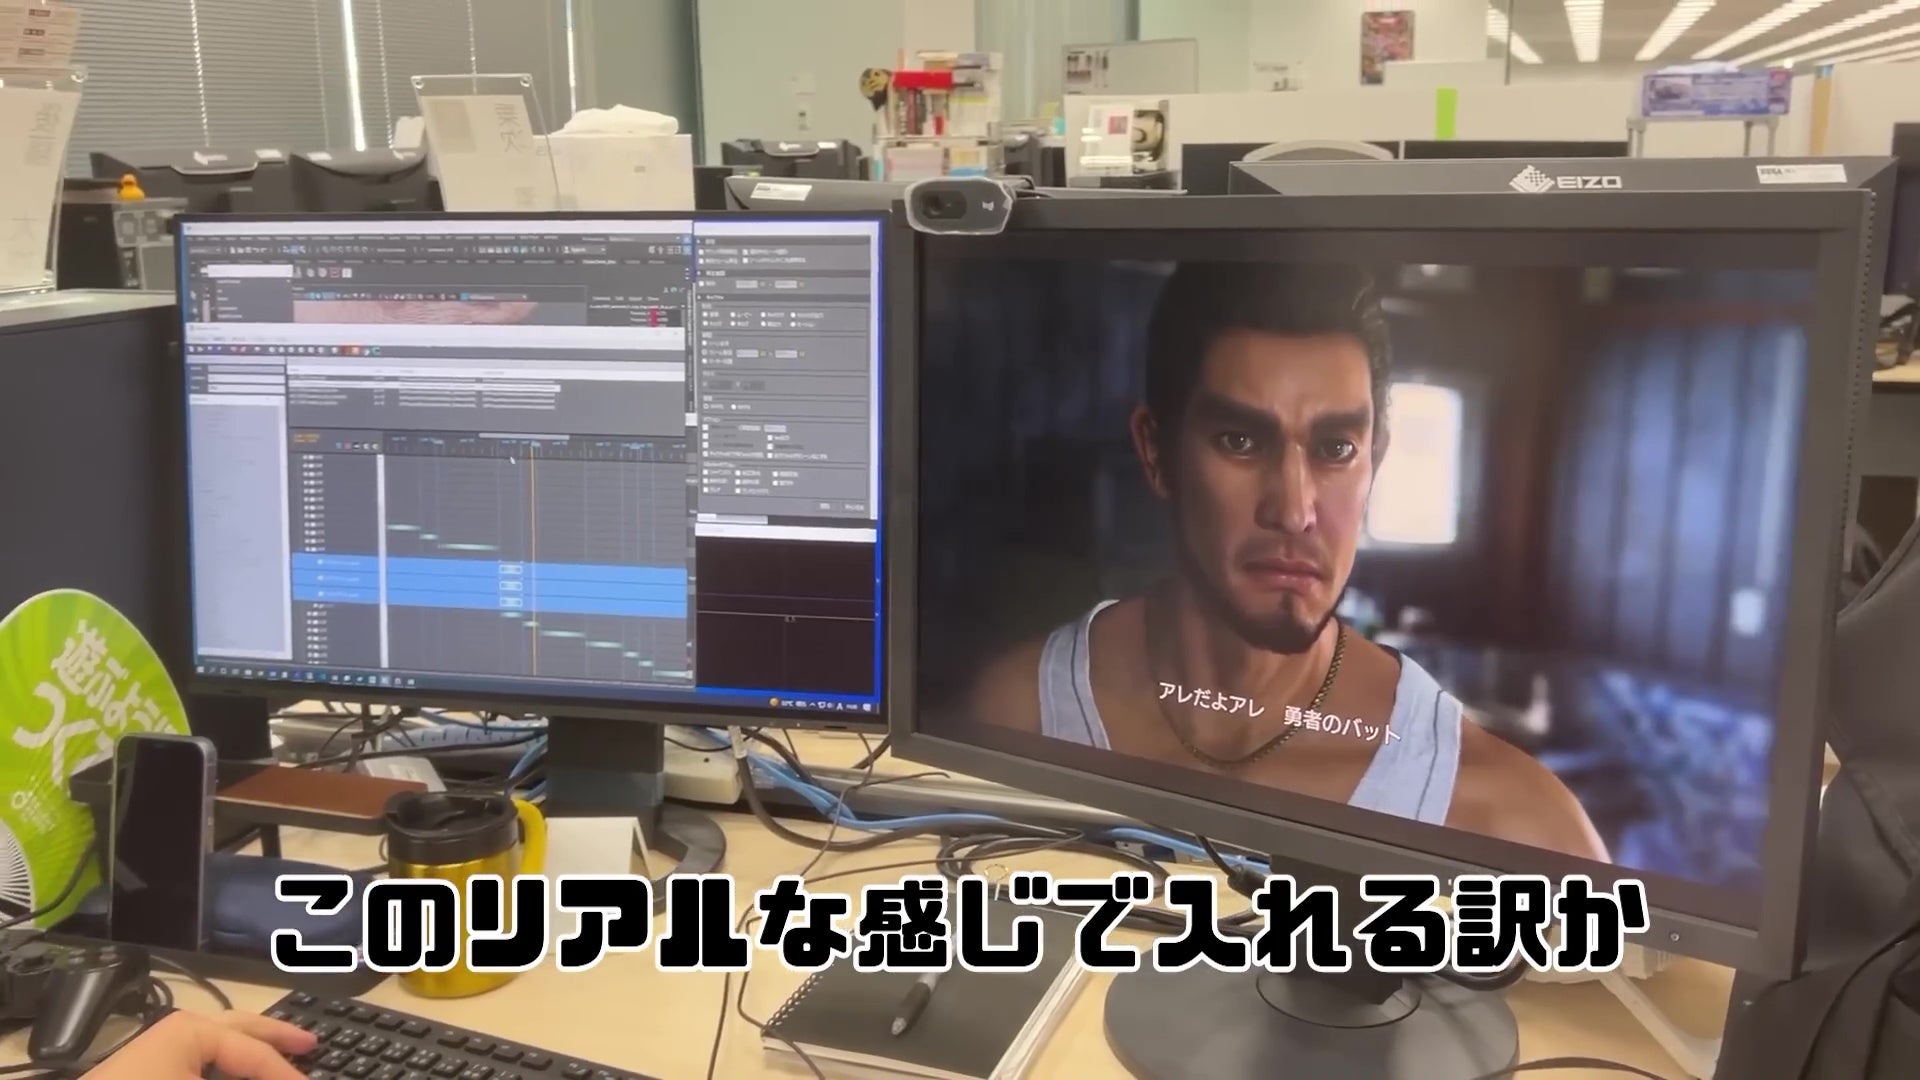 A glimpse of Ichiban from a developer's screen, which seems to show Yakuza 8.